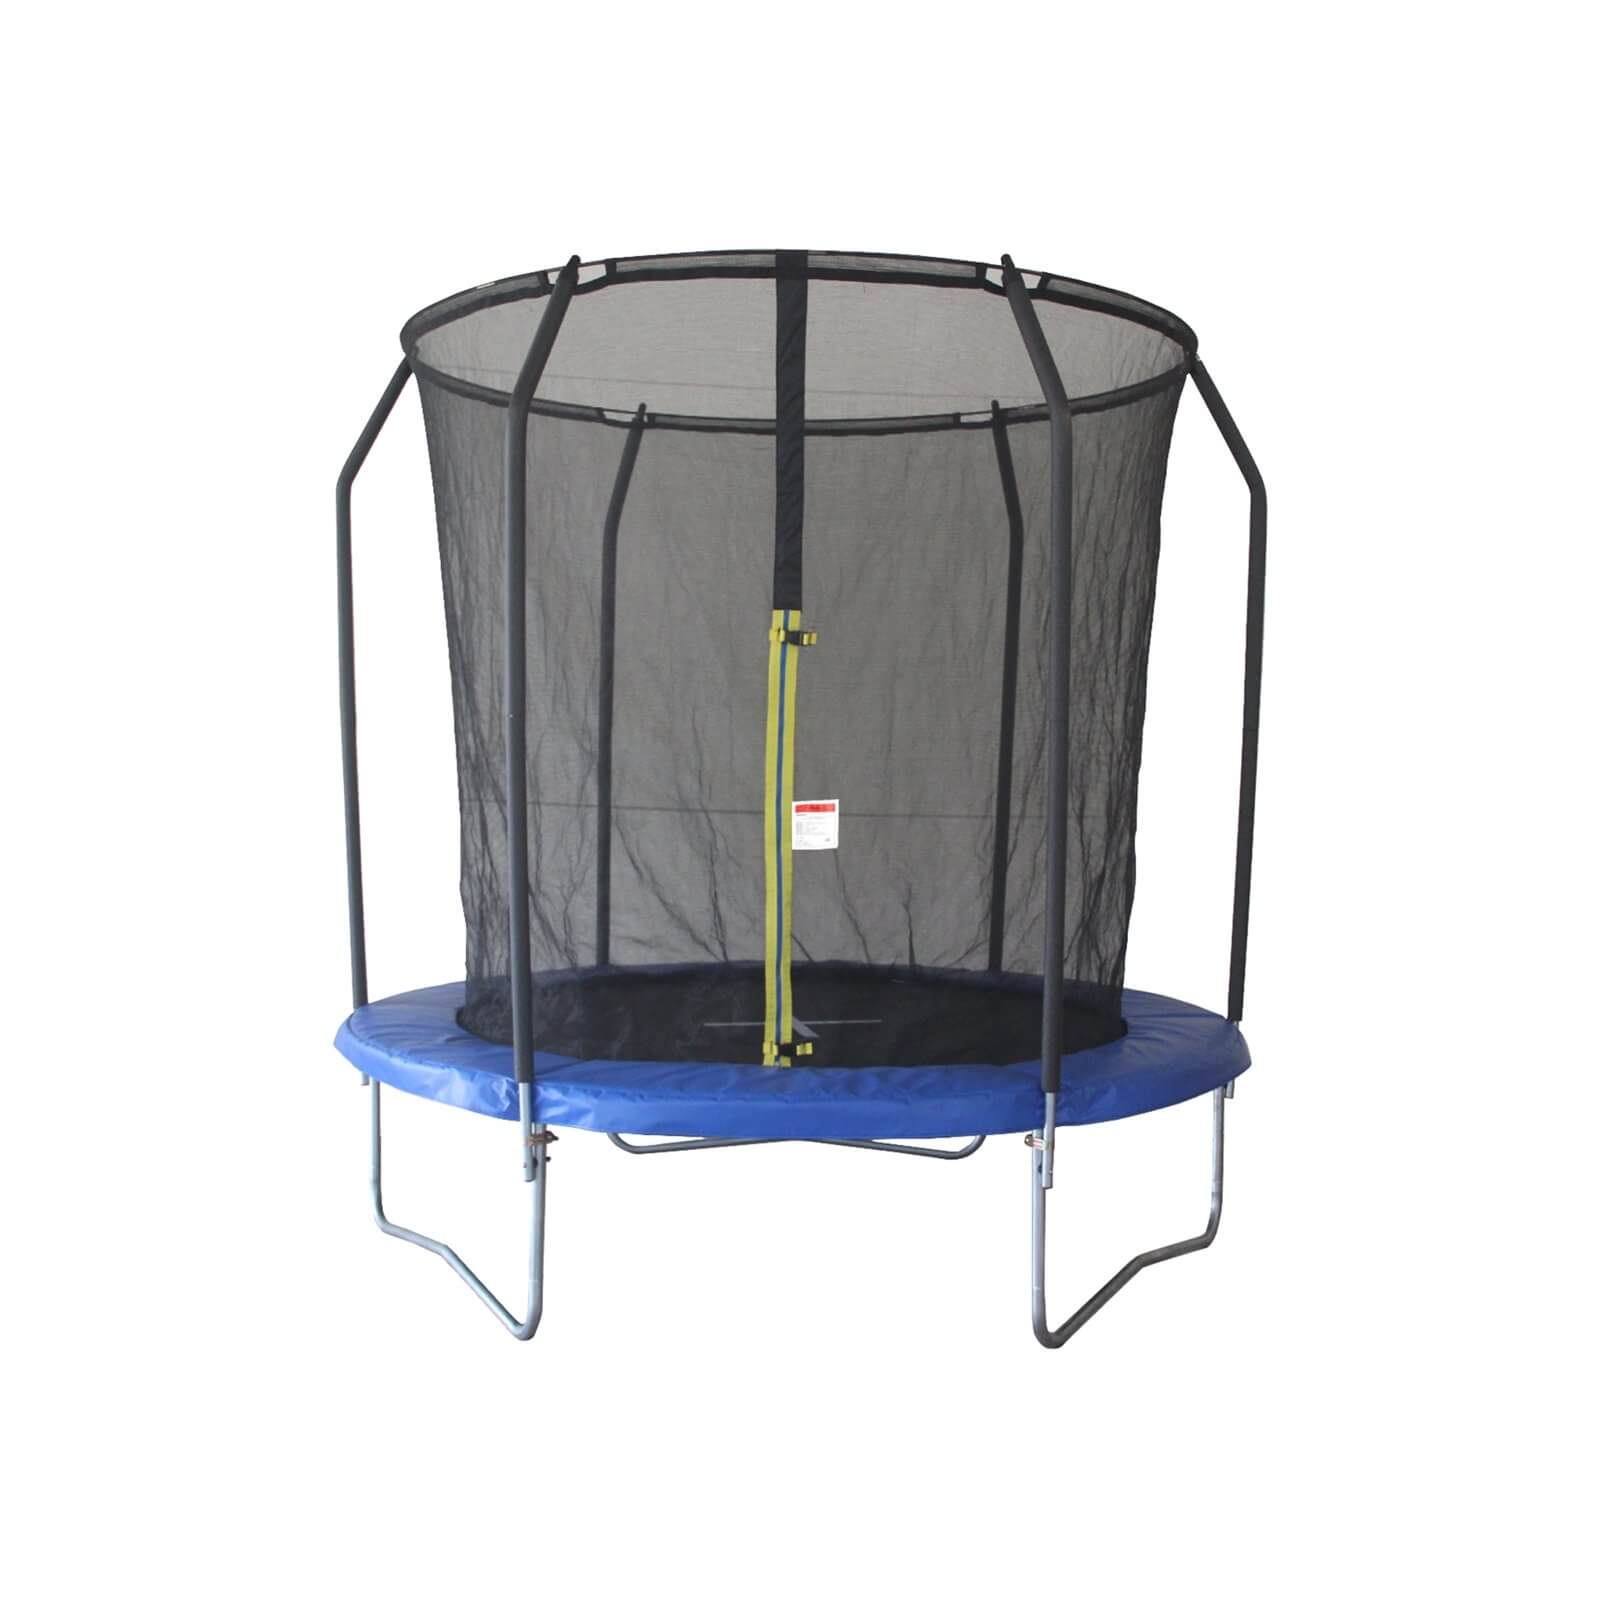 8ft Trampoline With Safety Enclosure